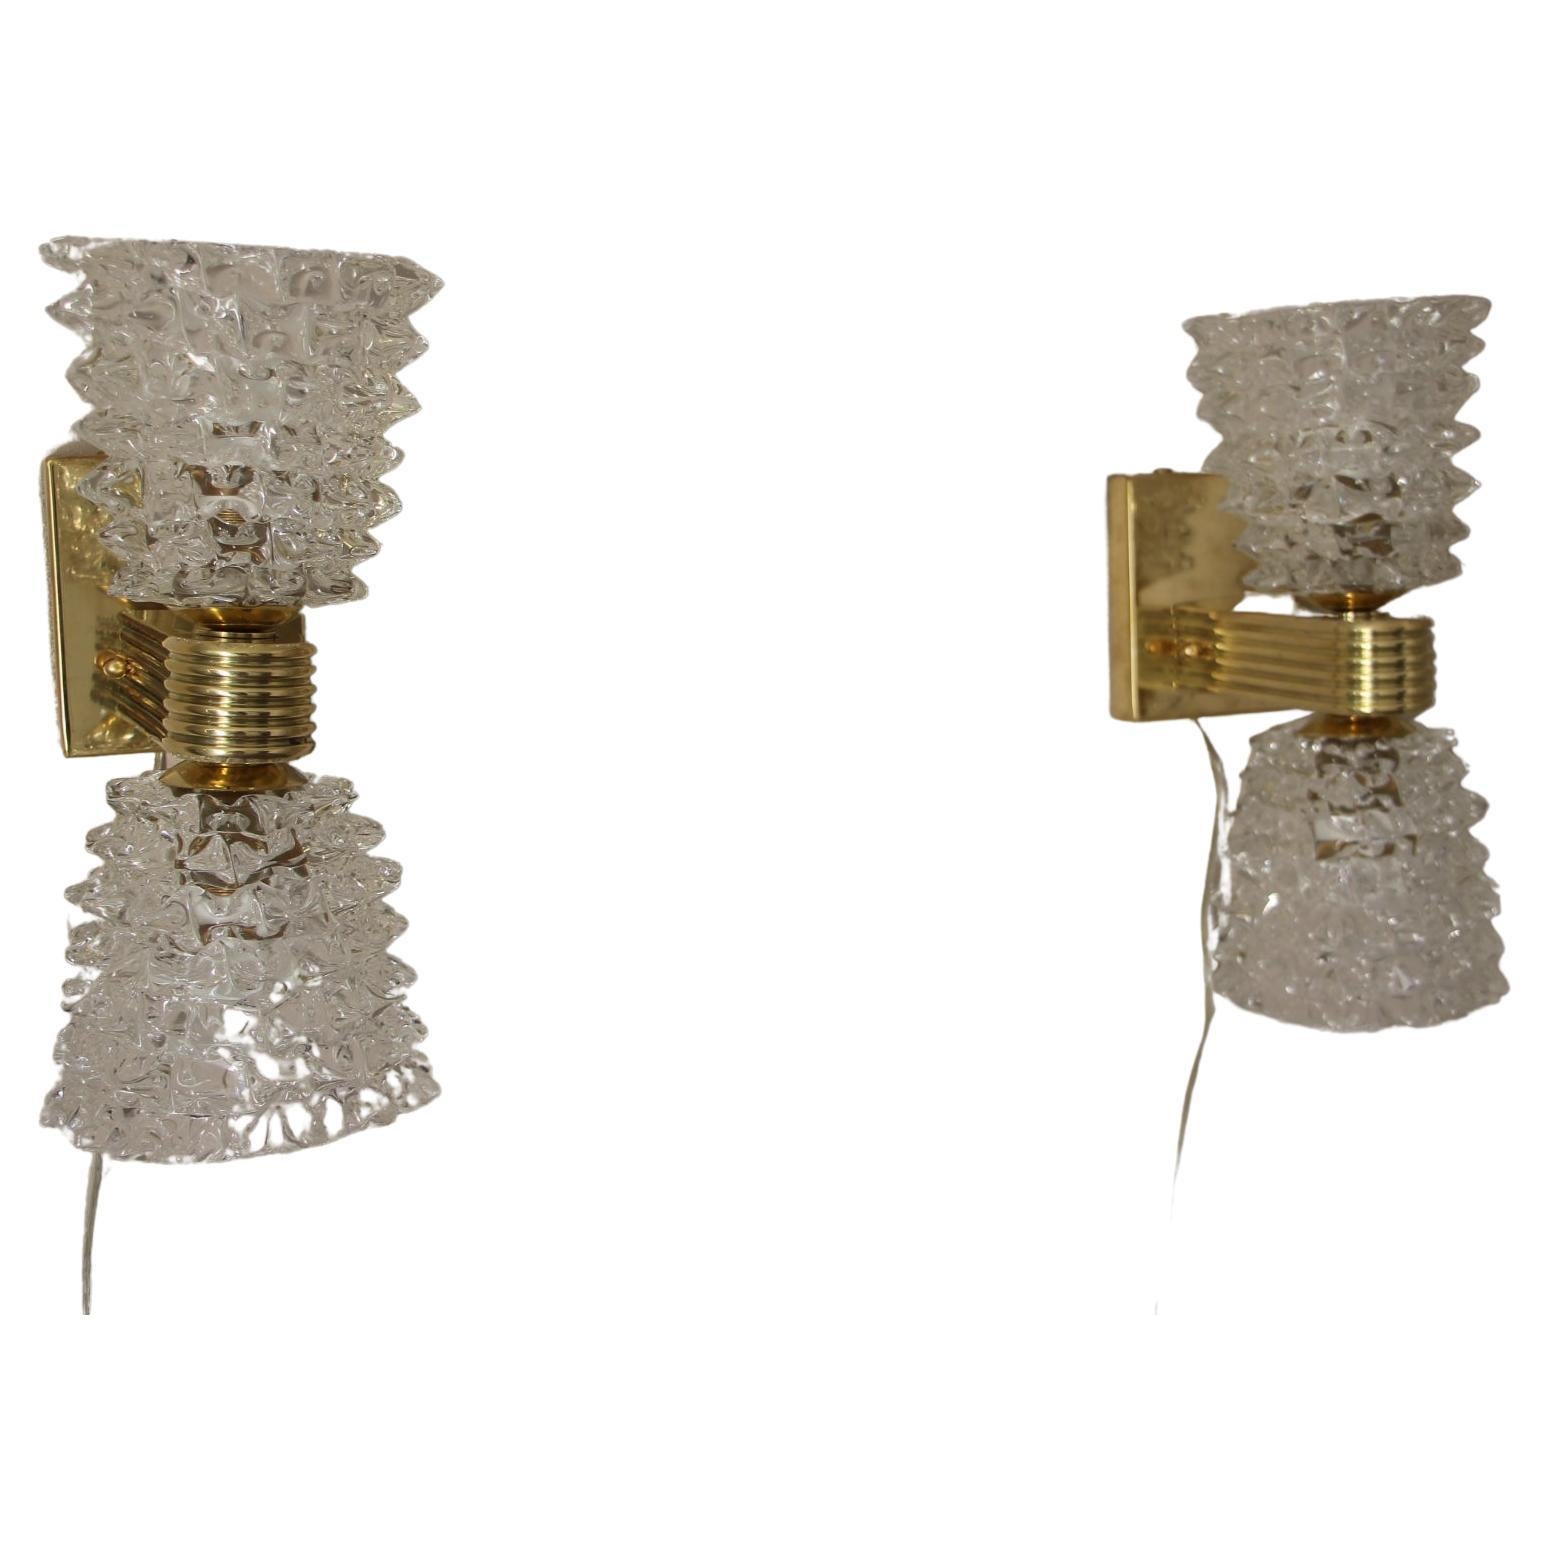 This magnificent pair of sconces from Murano was made according to the hand made rostrato technique. It means that each spike of glass was individually pulled in relief. one by one to get this flamboyant result.
It is a typical work of high skill of